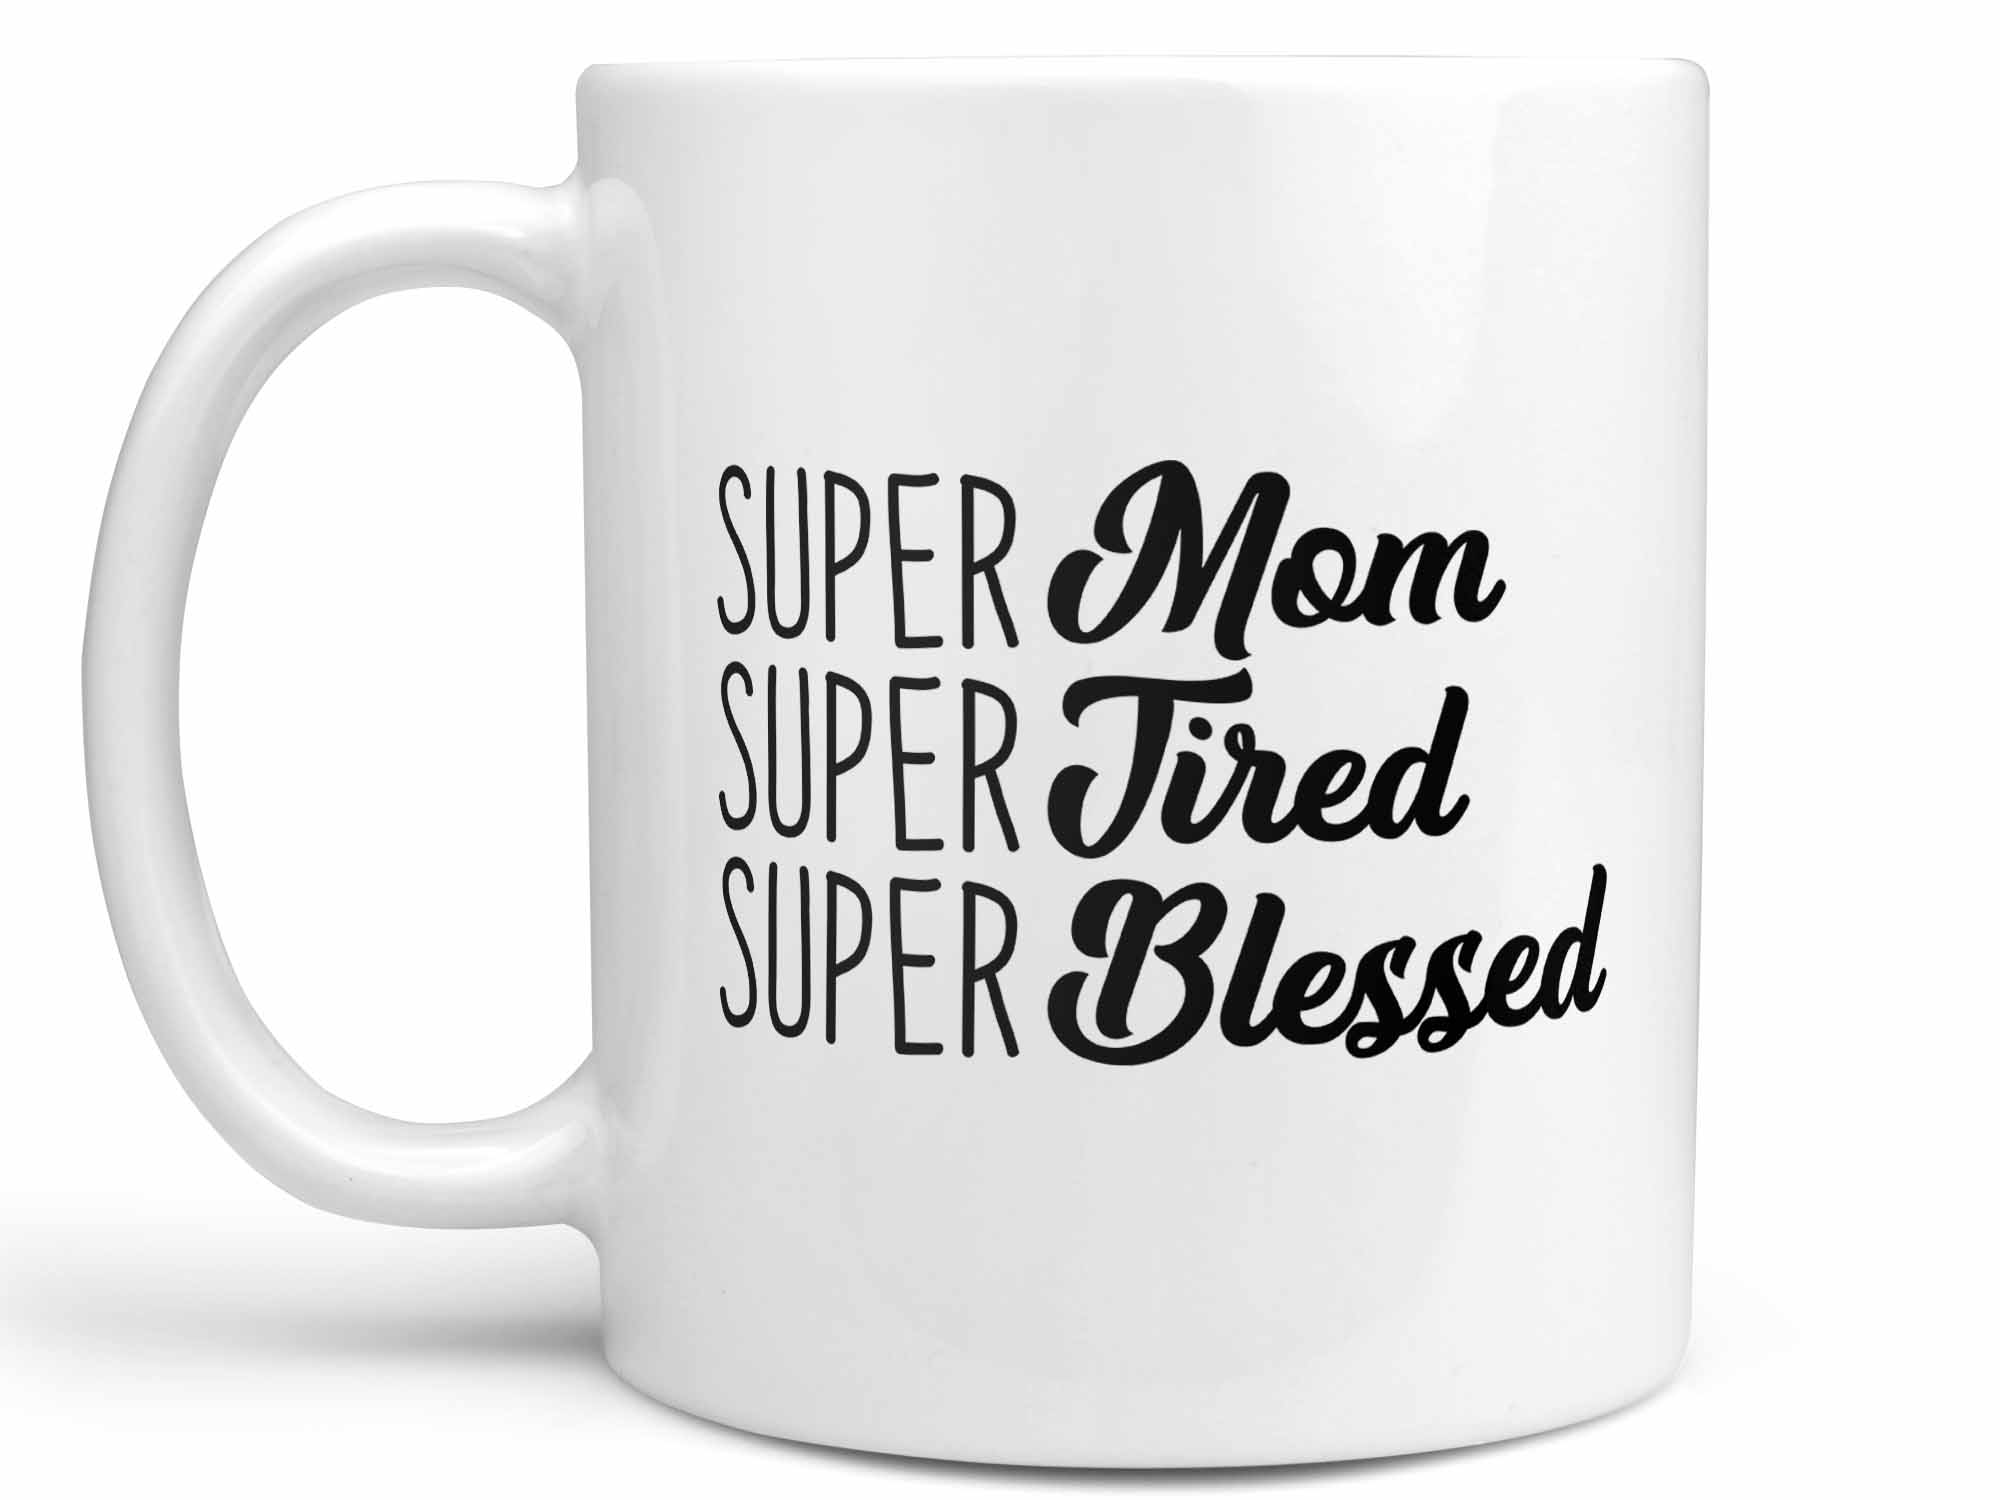 SUPER MOM, SUPER WIFE, SUPER TIRED Color Accent Coffee Mug - Choice of